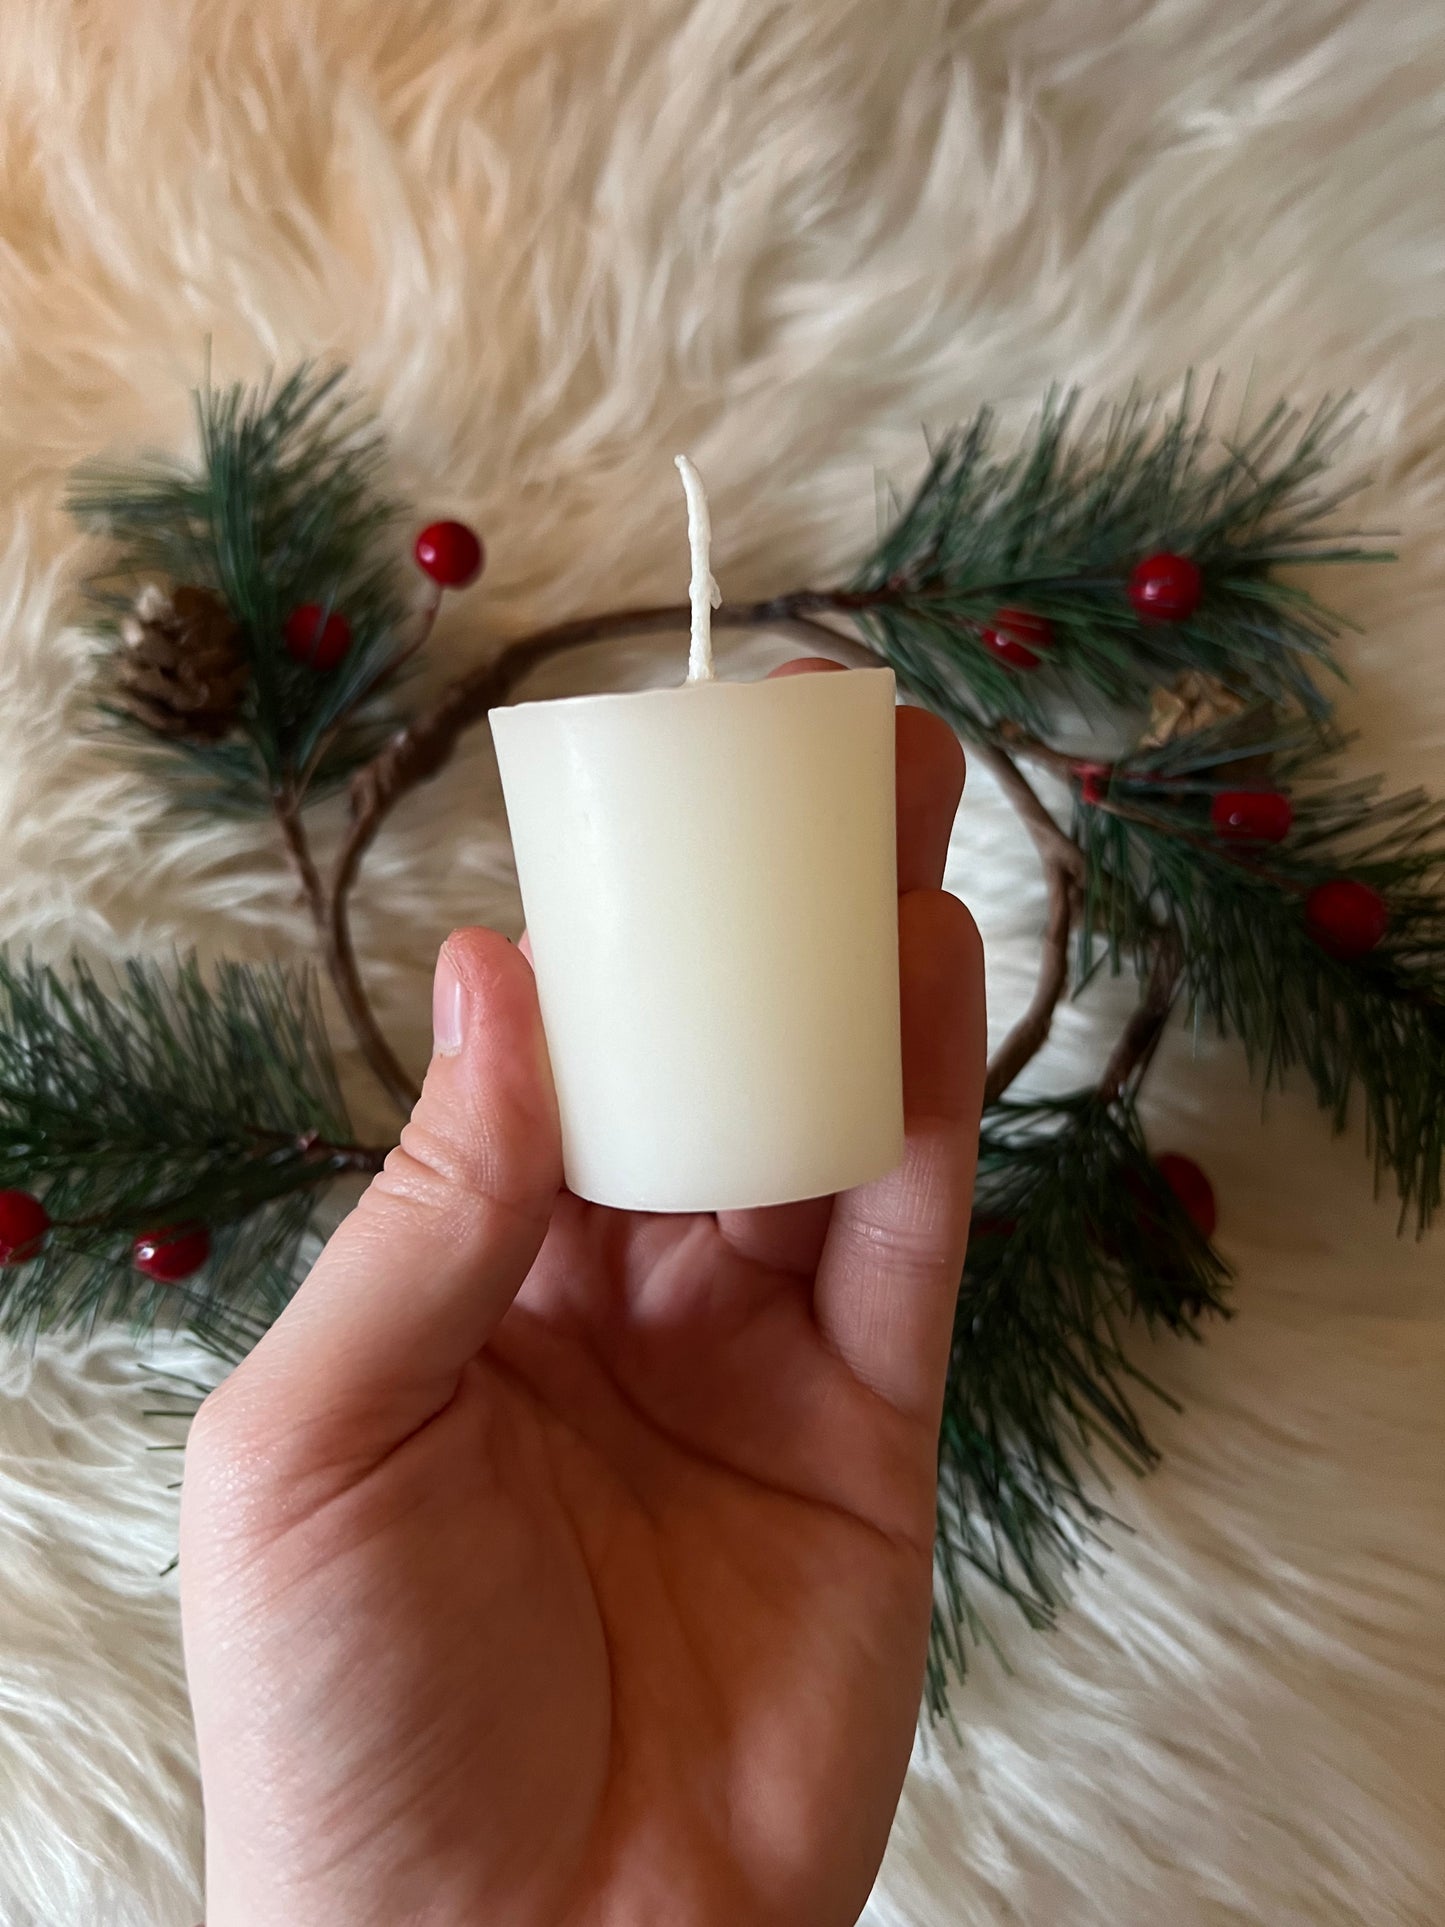 Votive Beeswax Candles